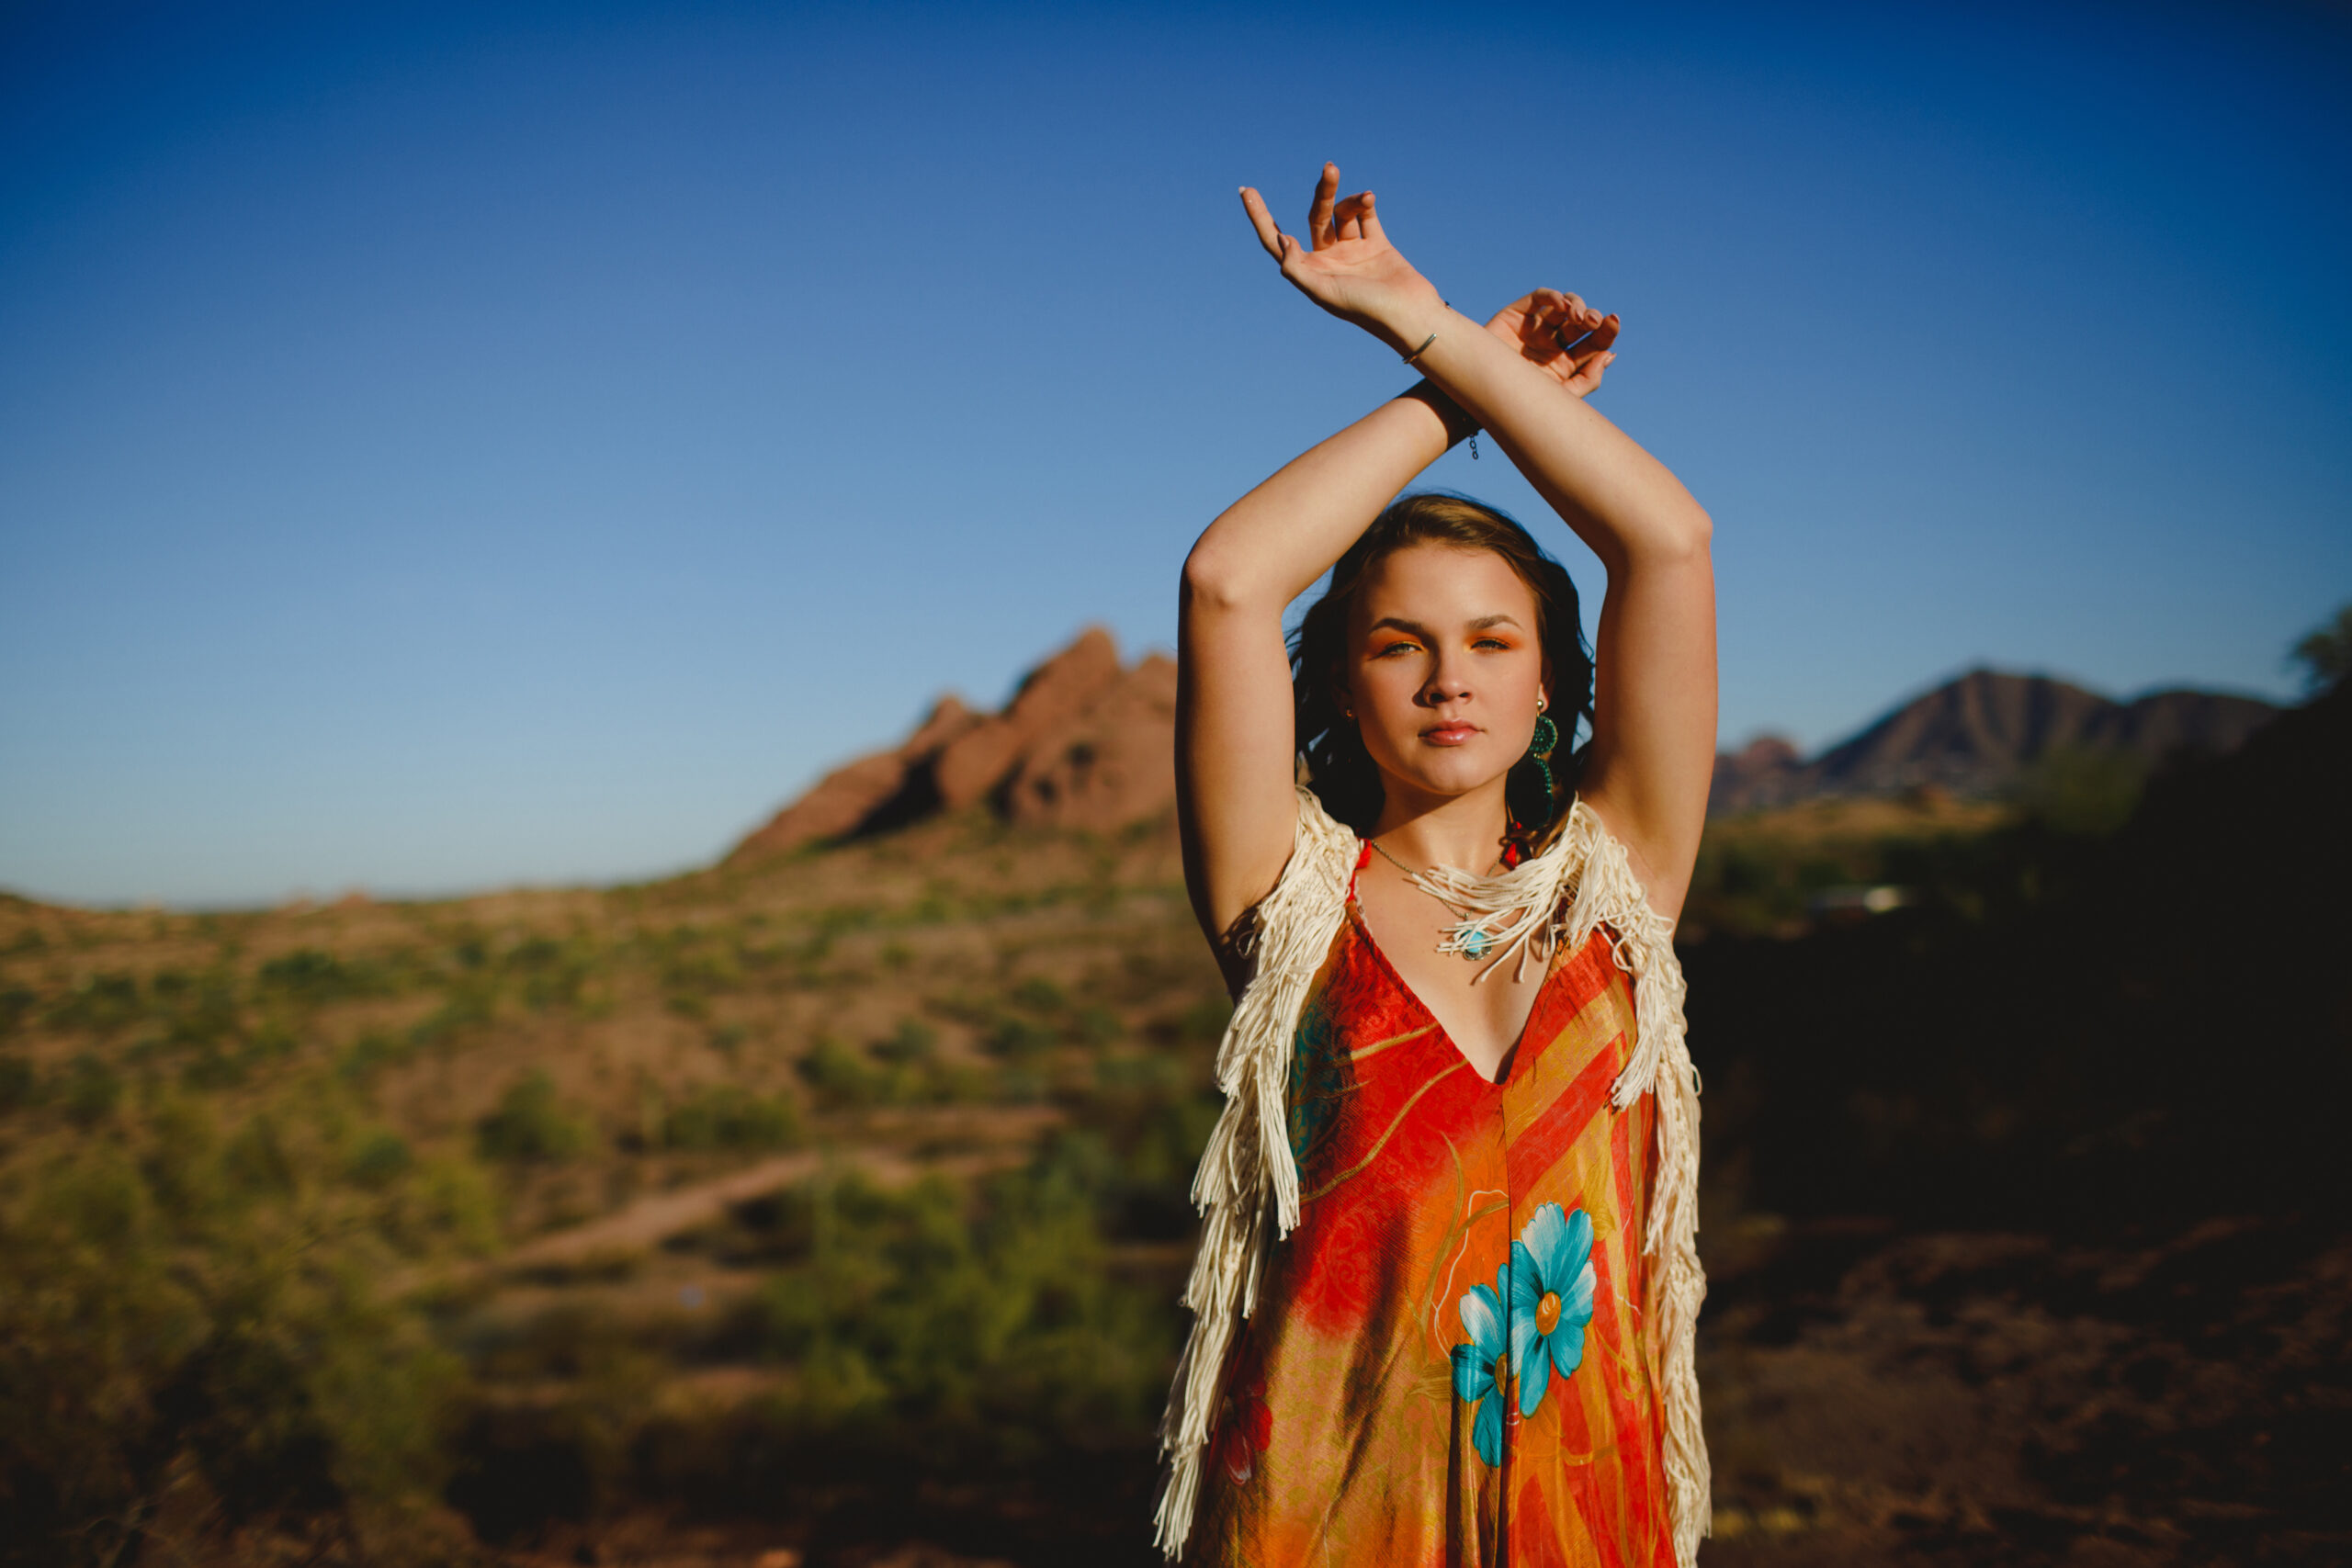 Abby posing in a bright colored jumpsuit and white macrame duster in the desert on location with slice of lime.